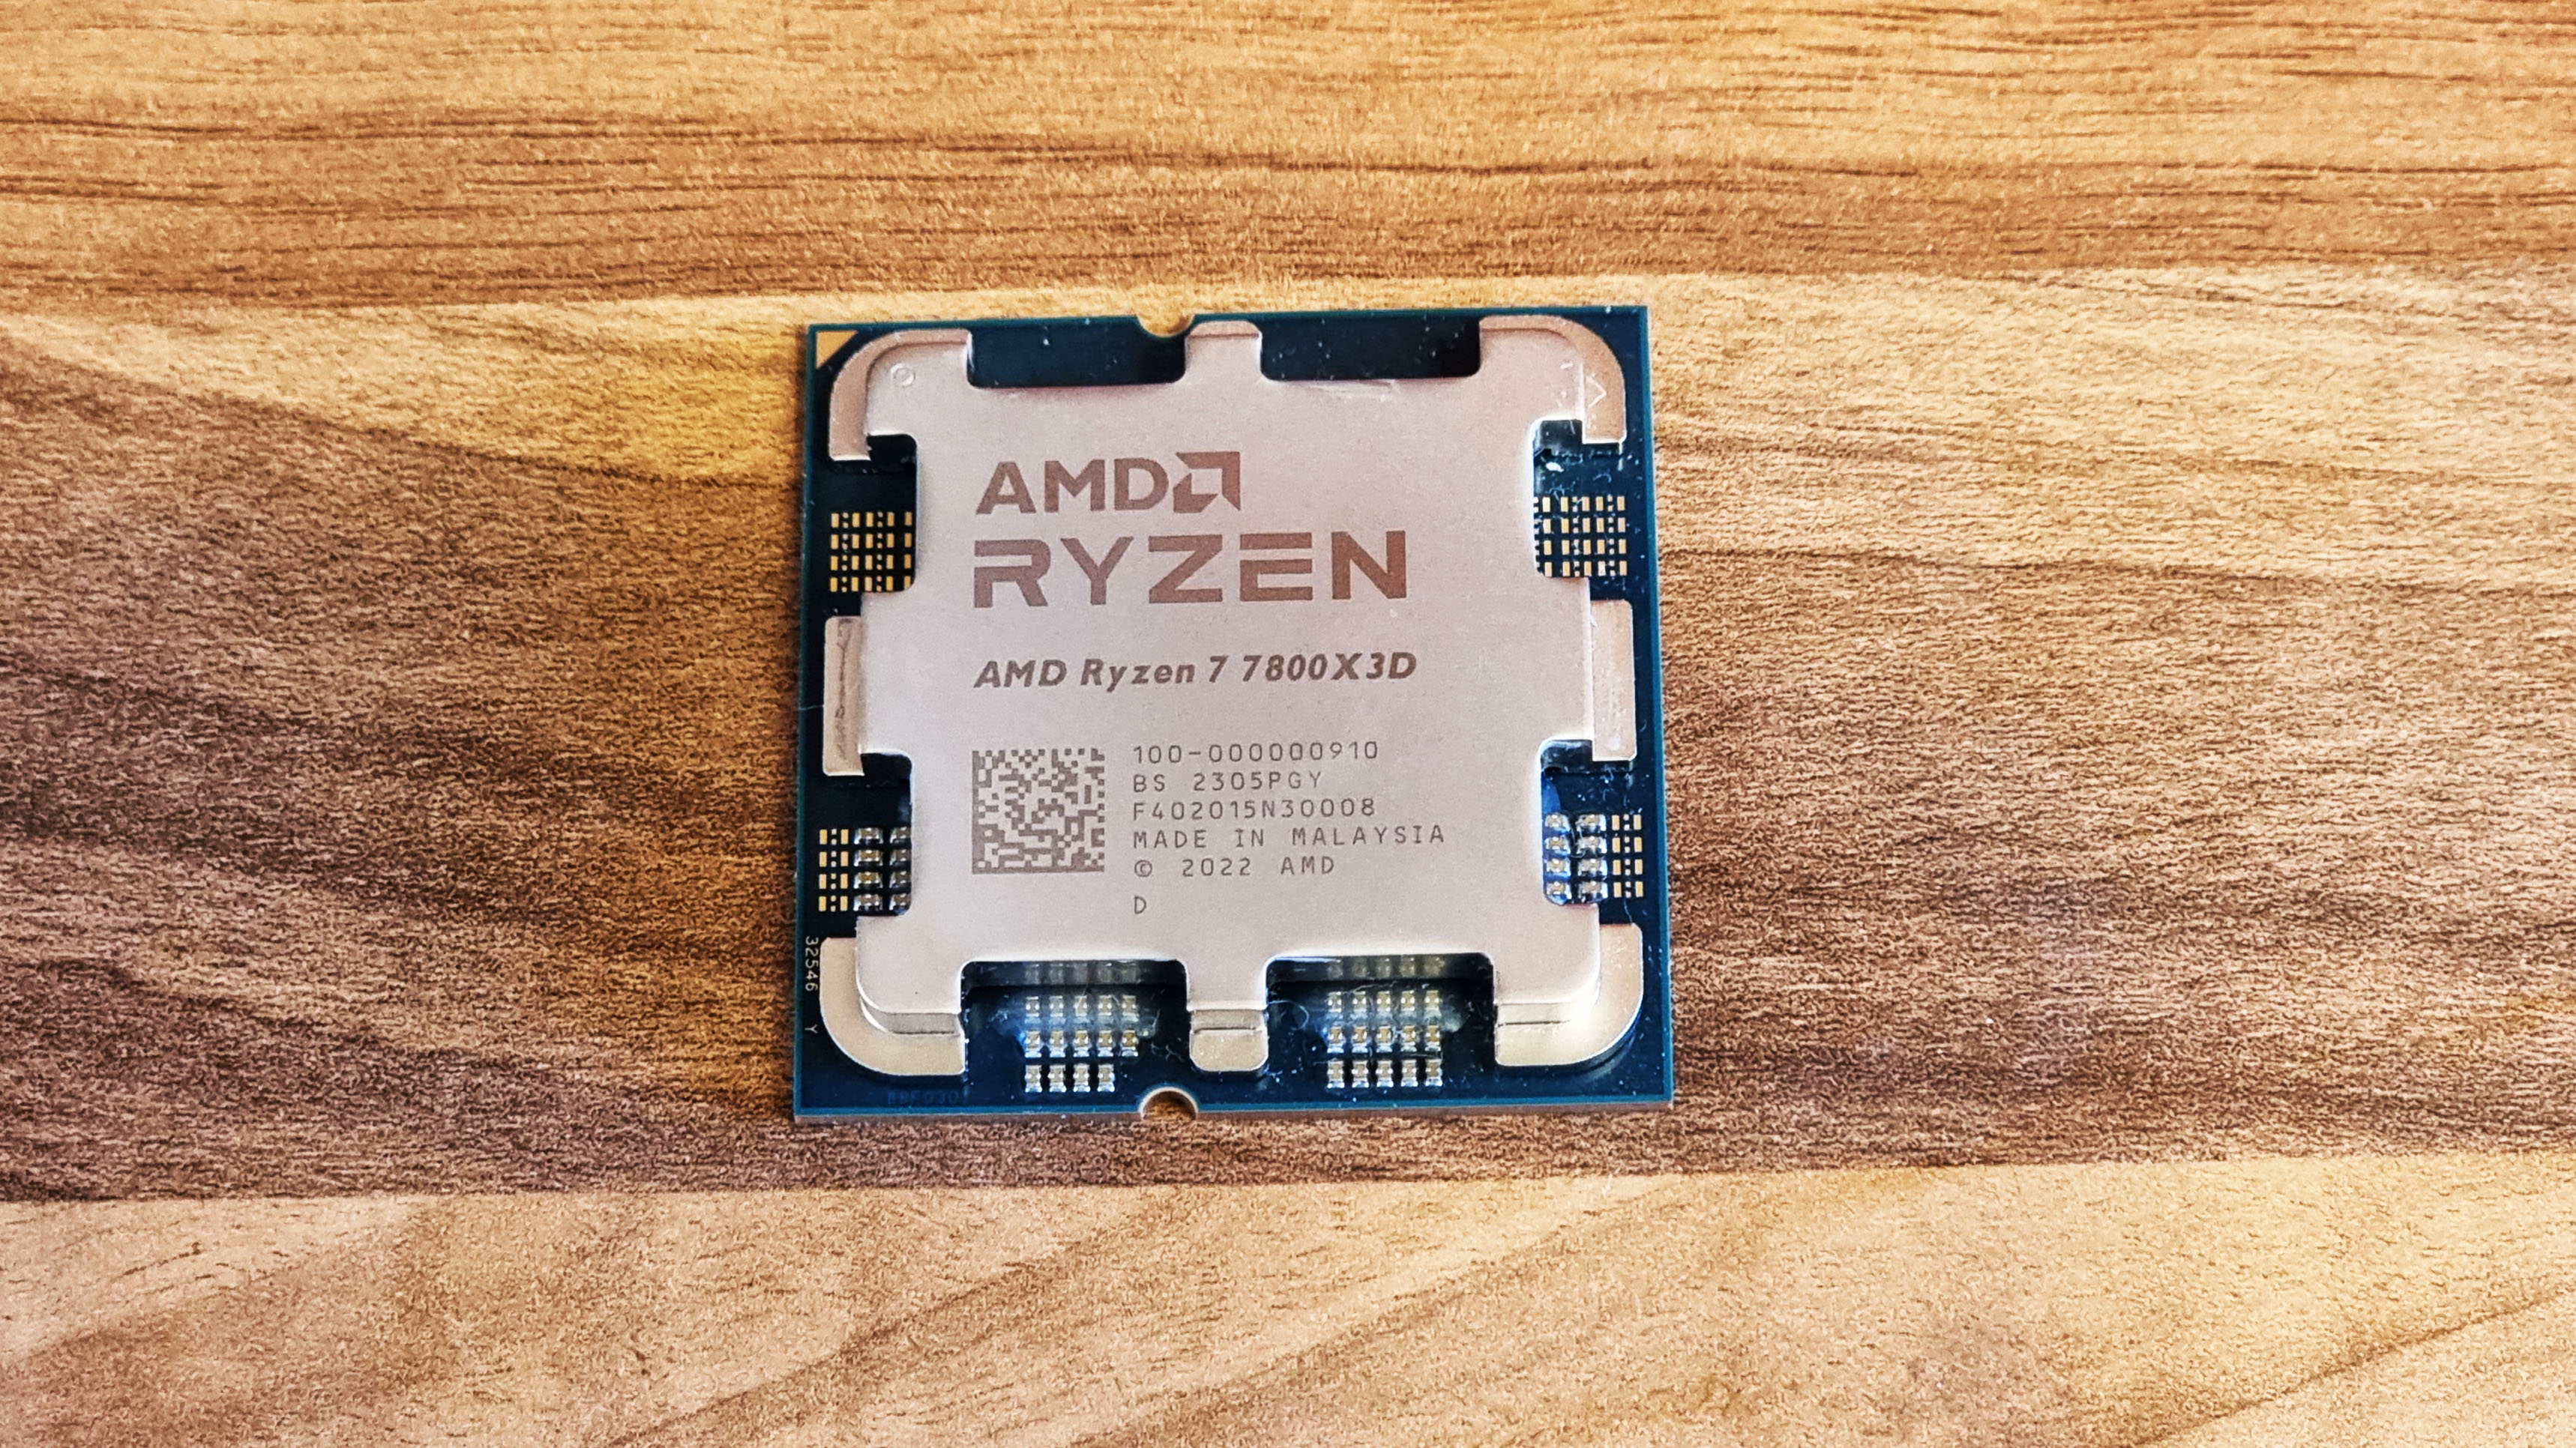 AMD Ryzen 7 7800X3D CPU review: A must-have for framerate chasers